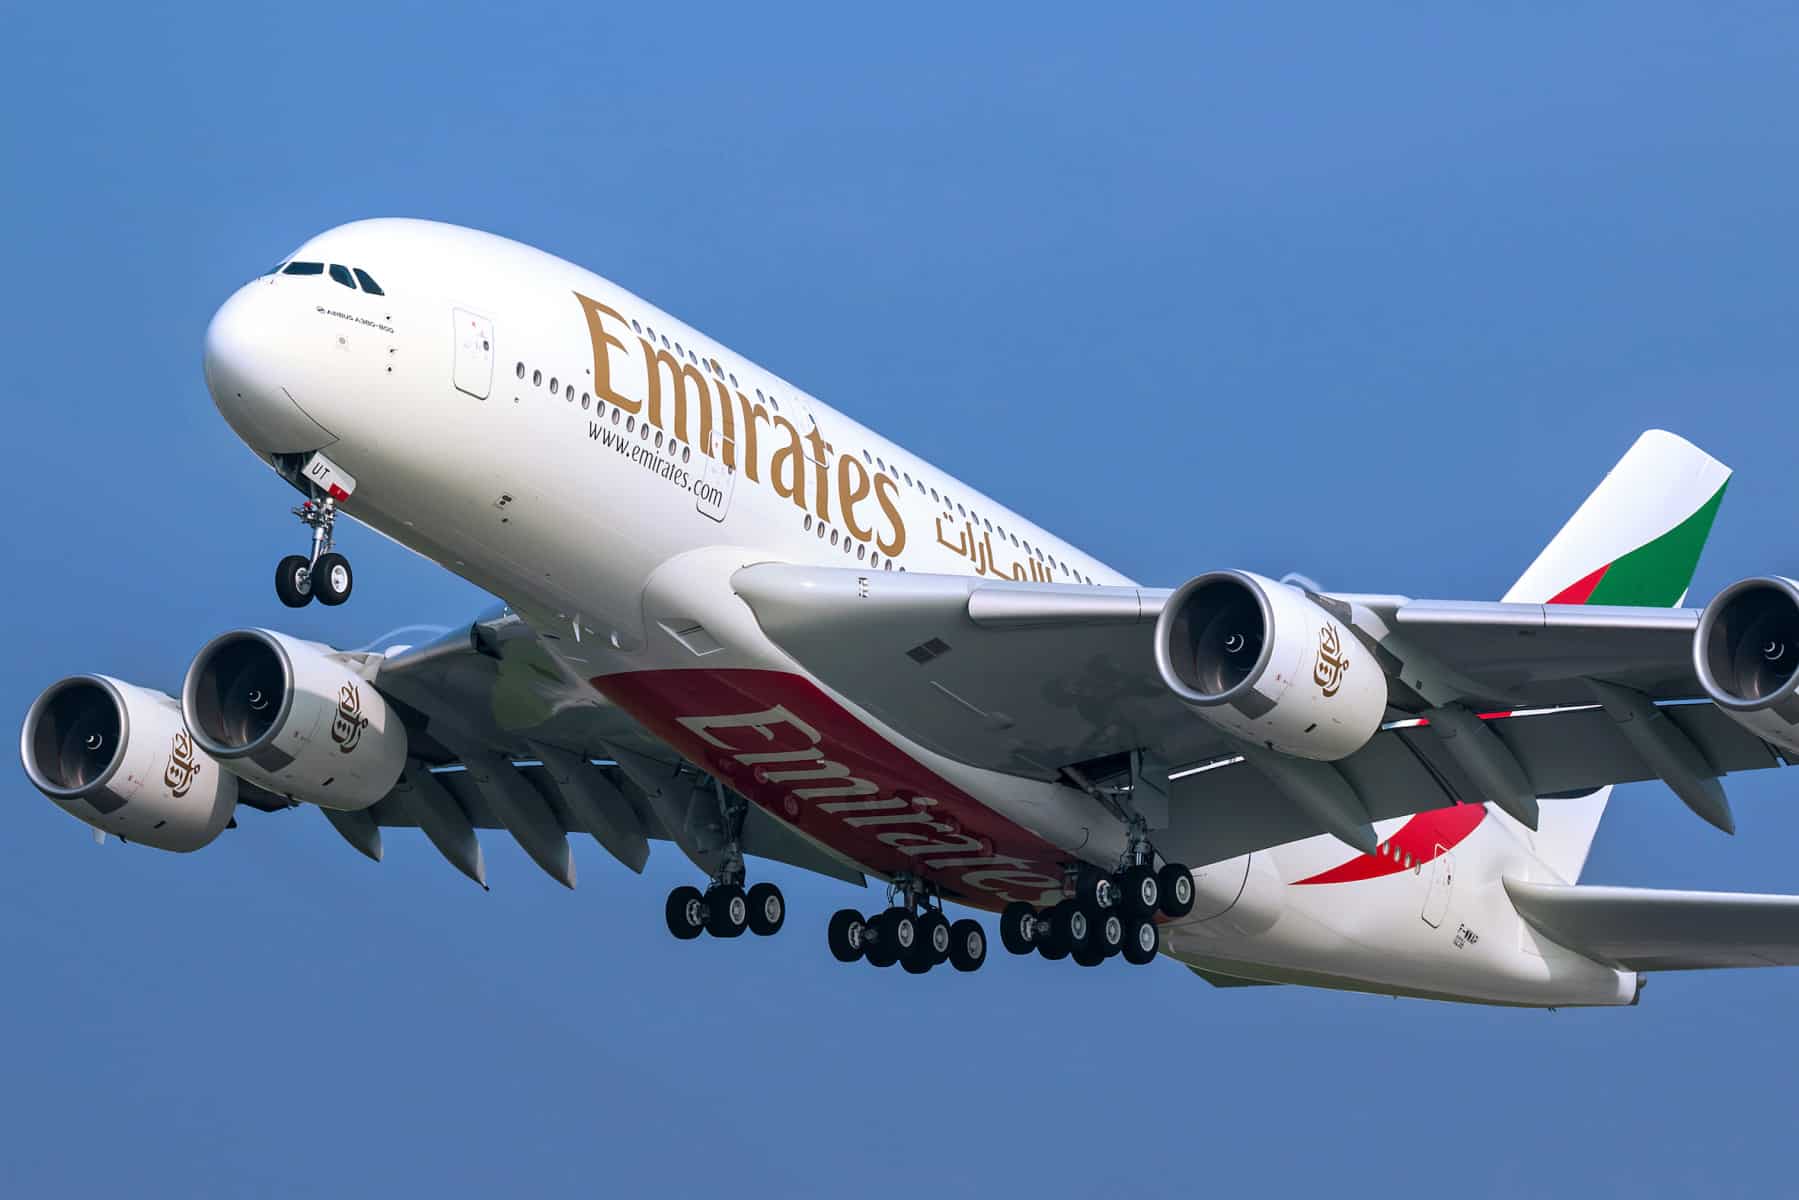 The triumphant return of the Airbus A380 to Barcelona by Emirates